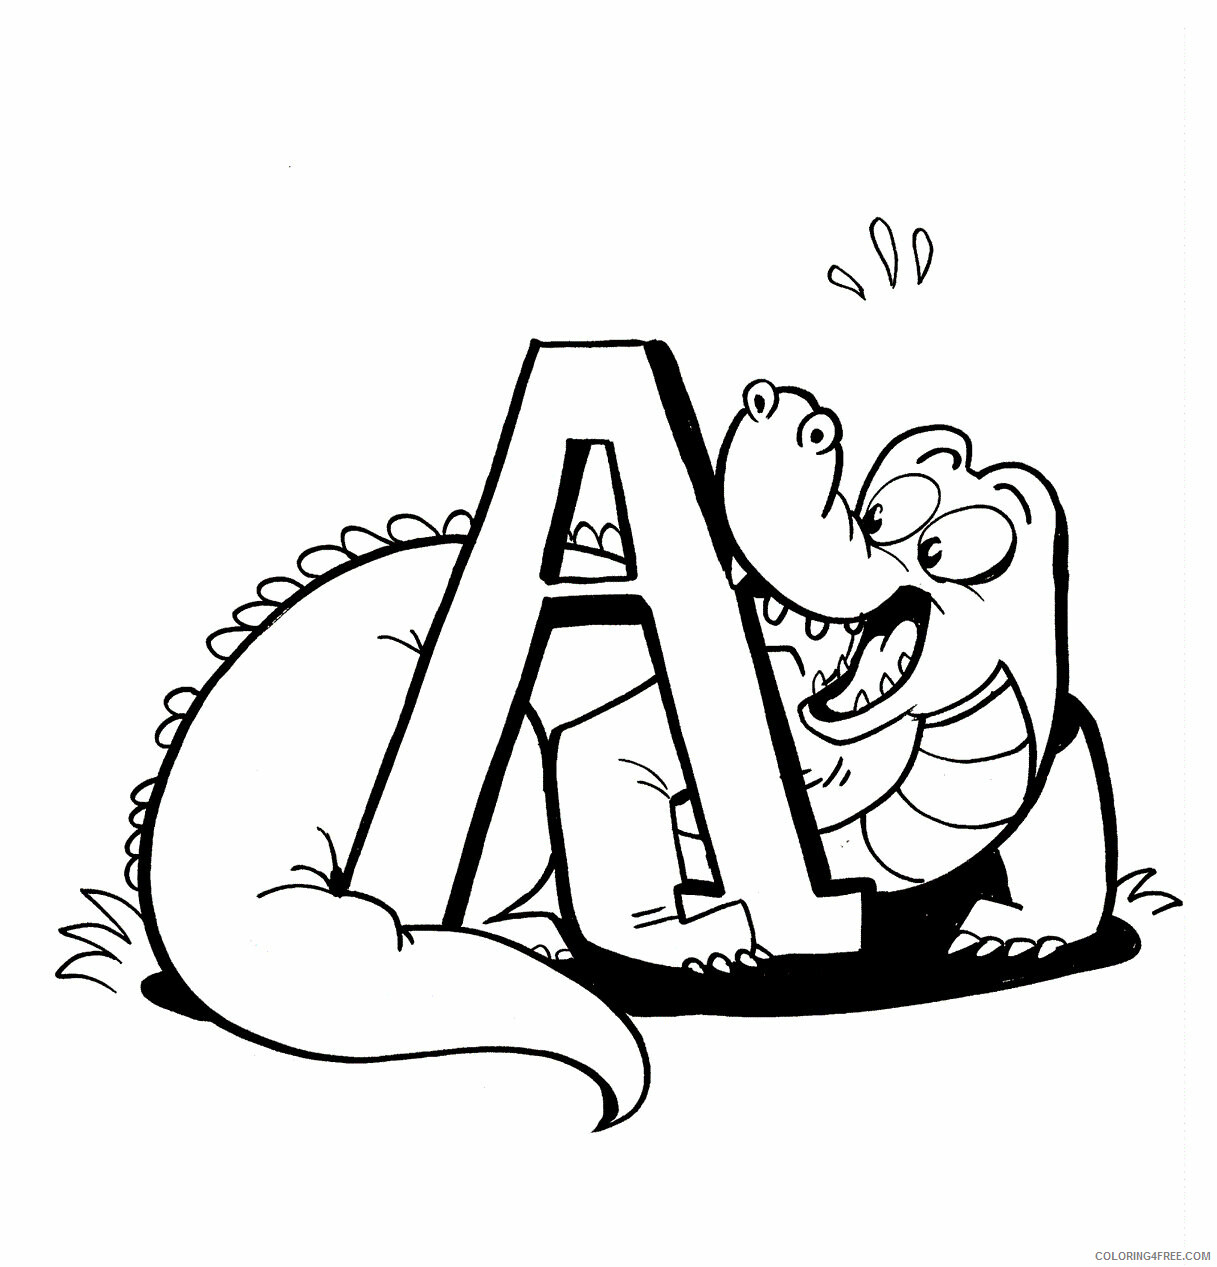 Alligator Coloring Pages Animal Printable Sheets Alligator for Kids 2021 0055 Coloring4free